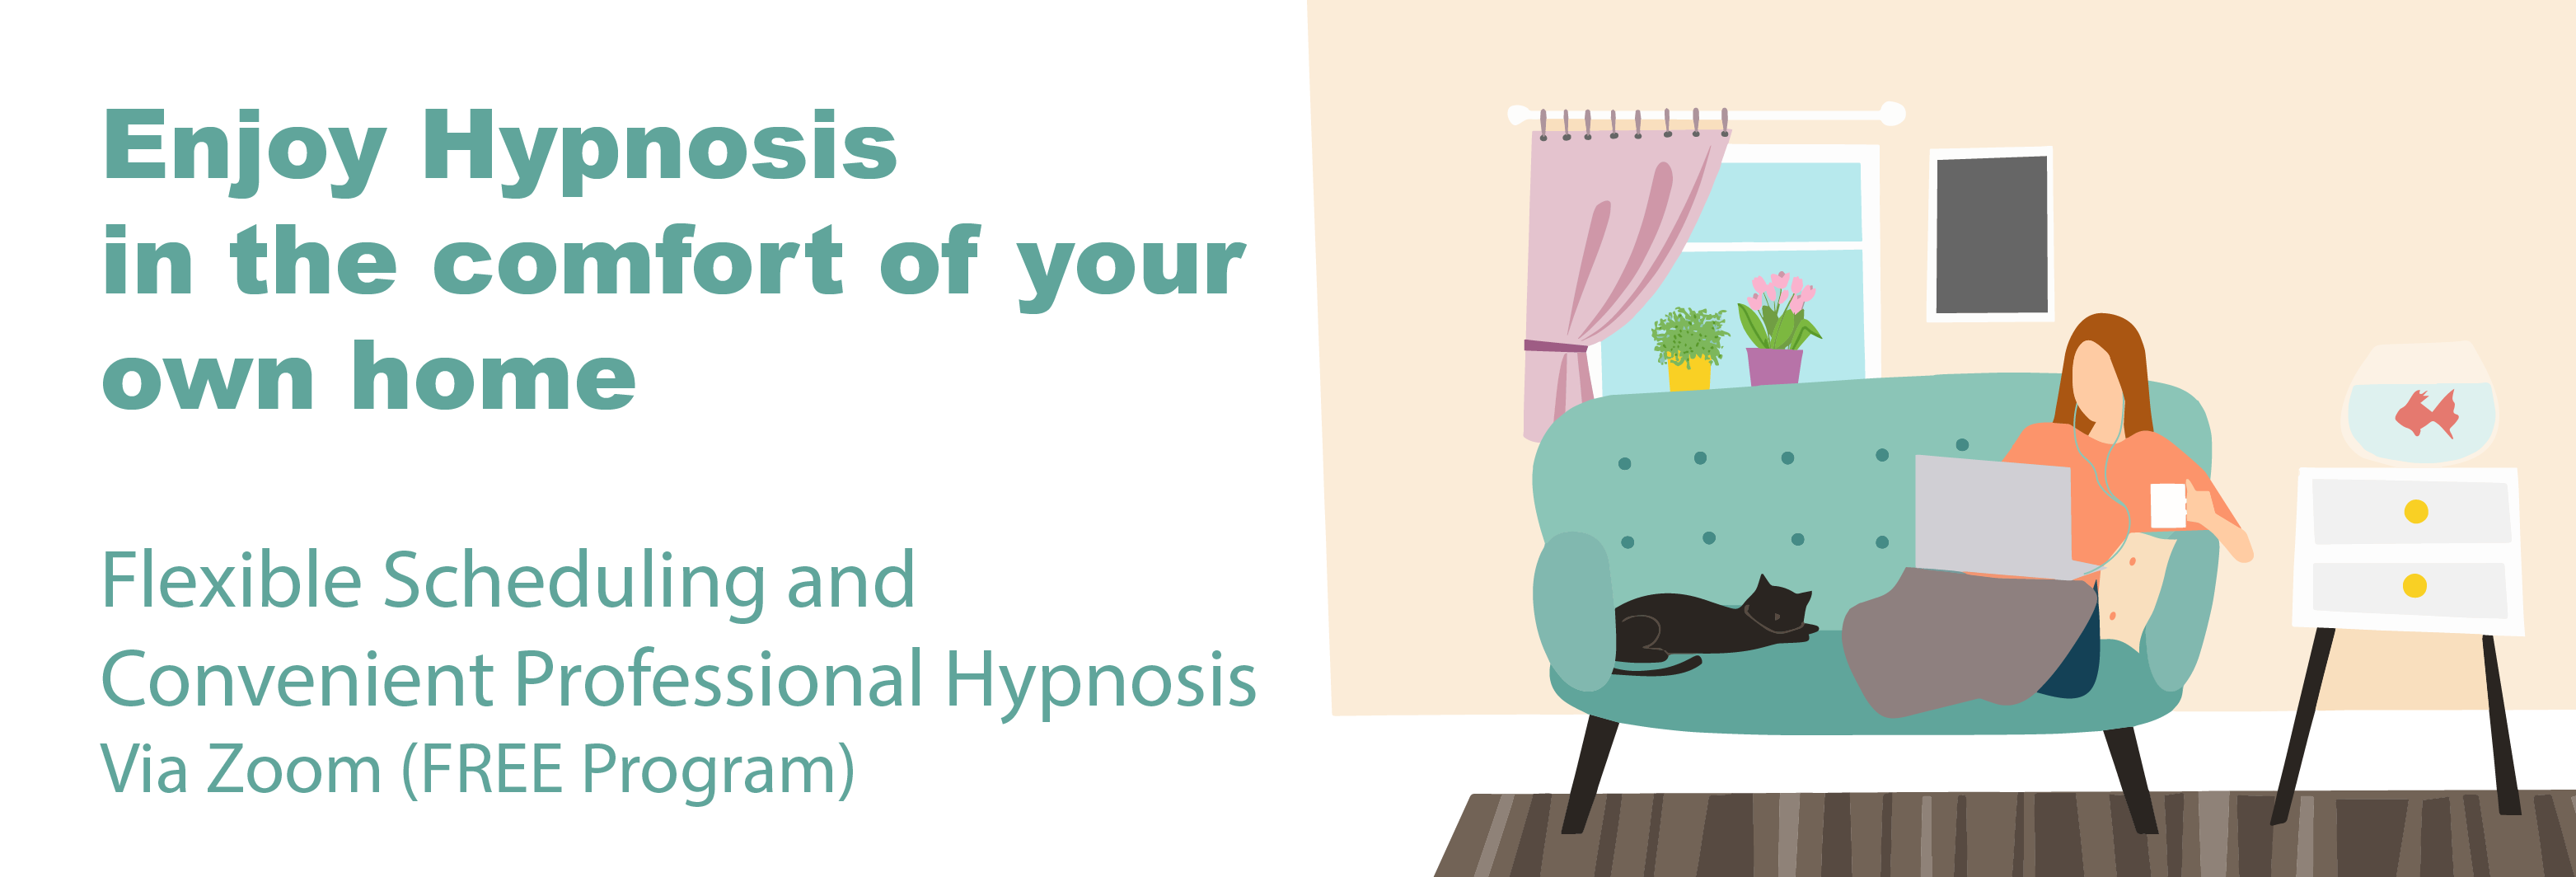 Enjoy hypnosis in the comfort of your own home